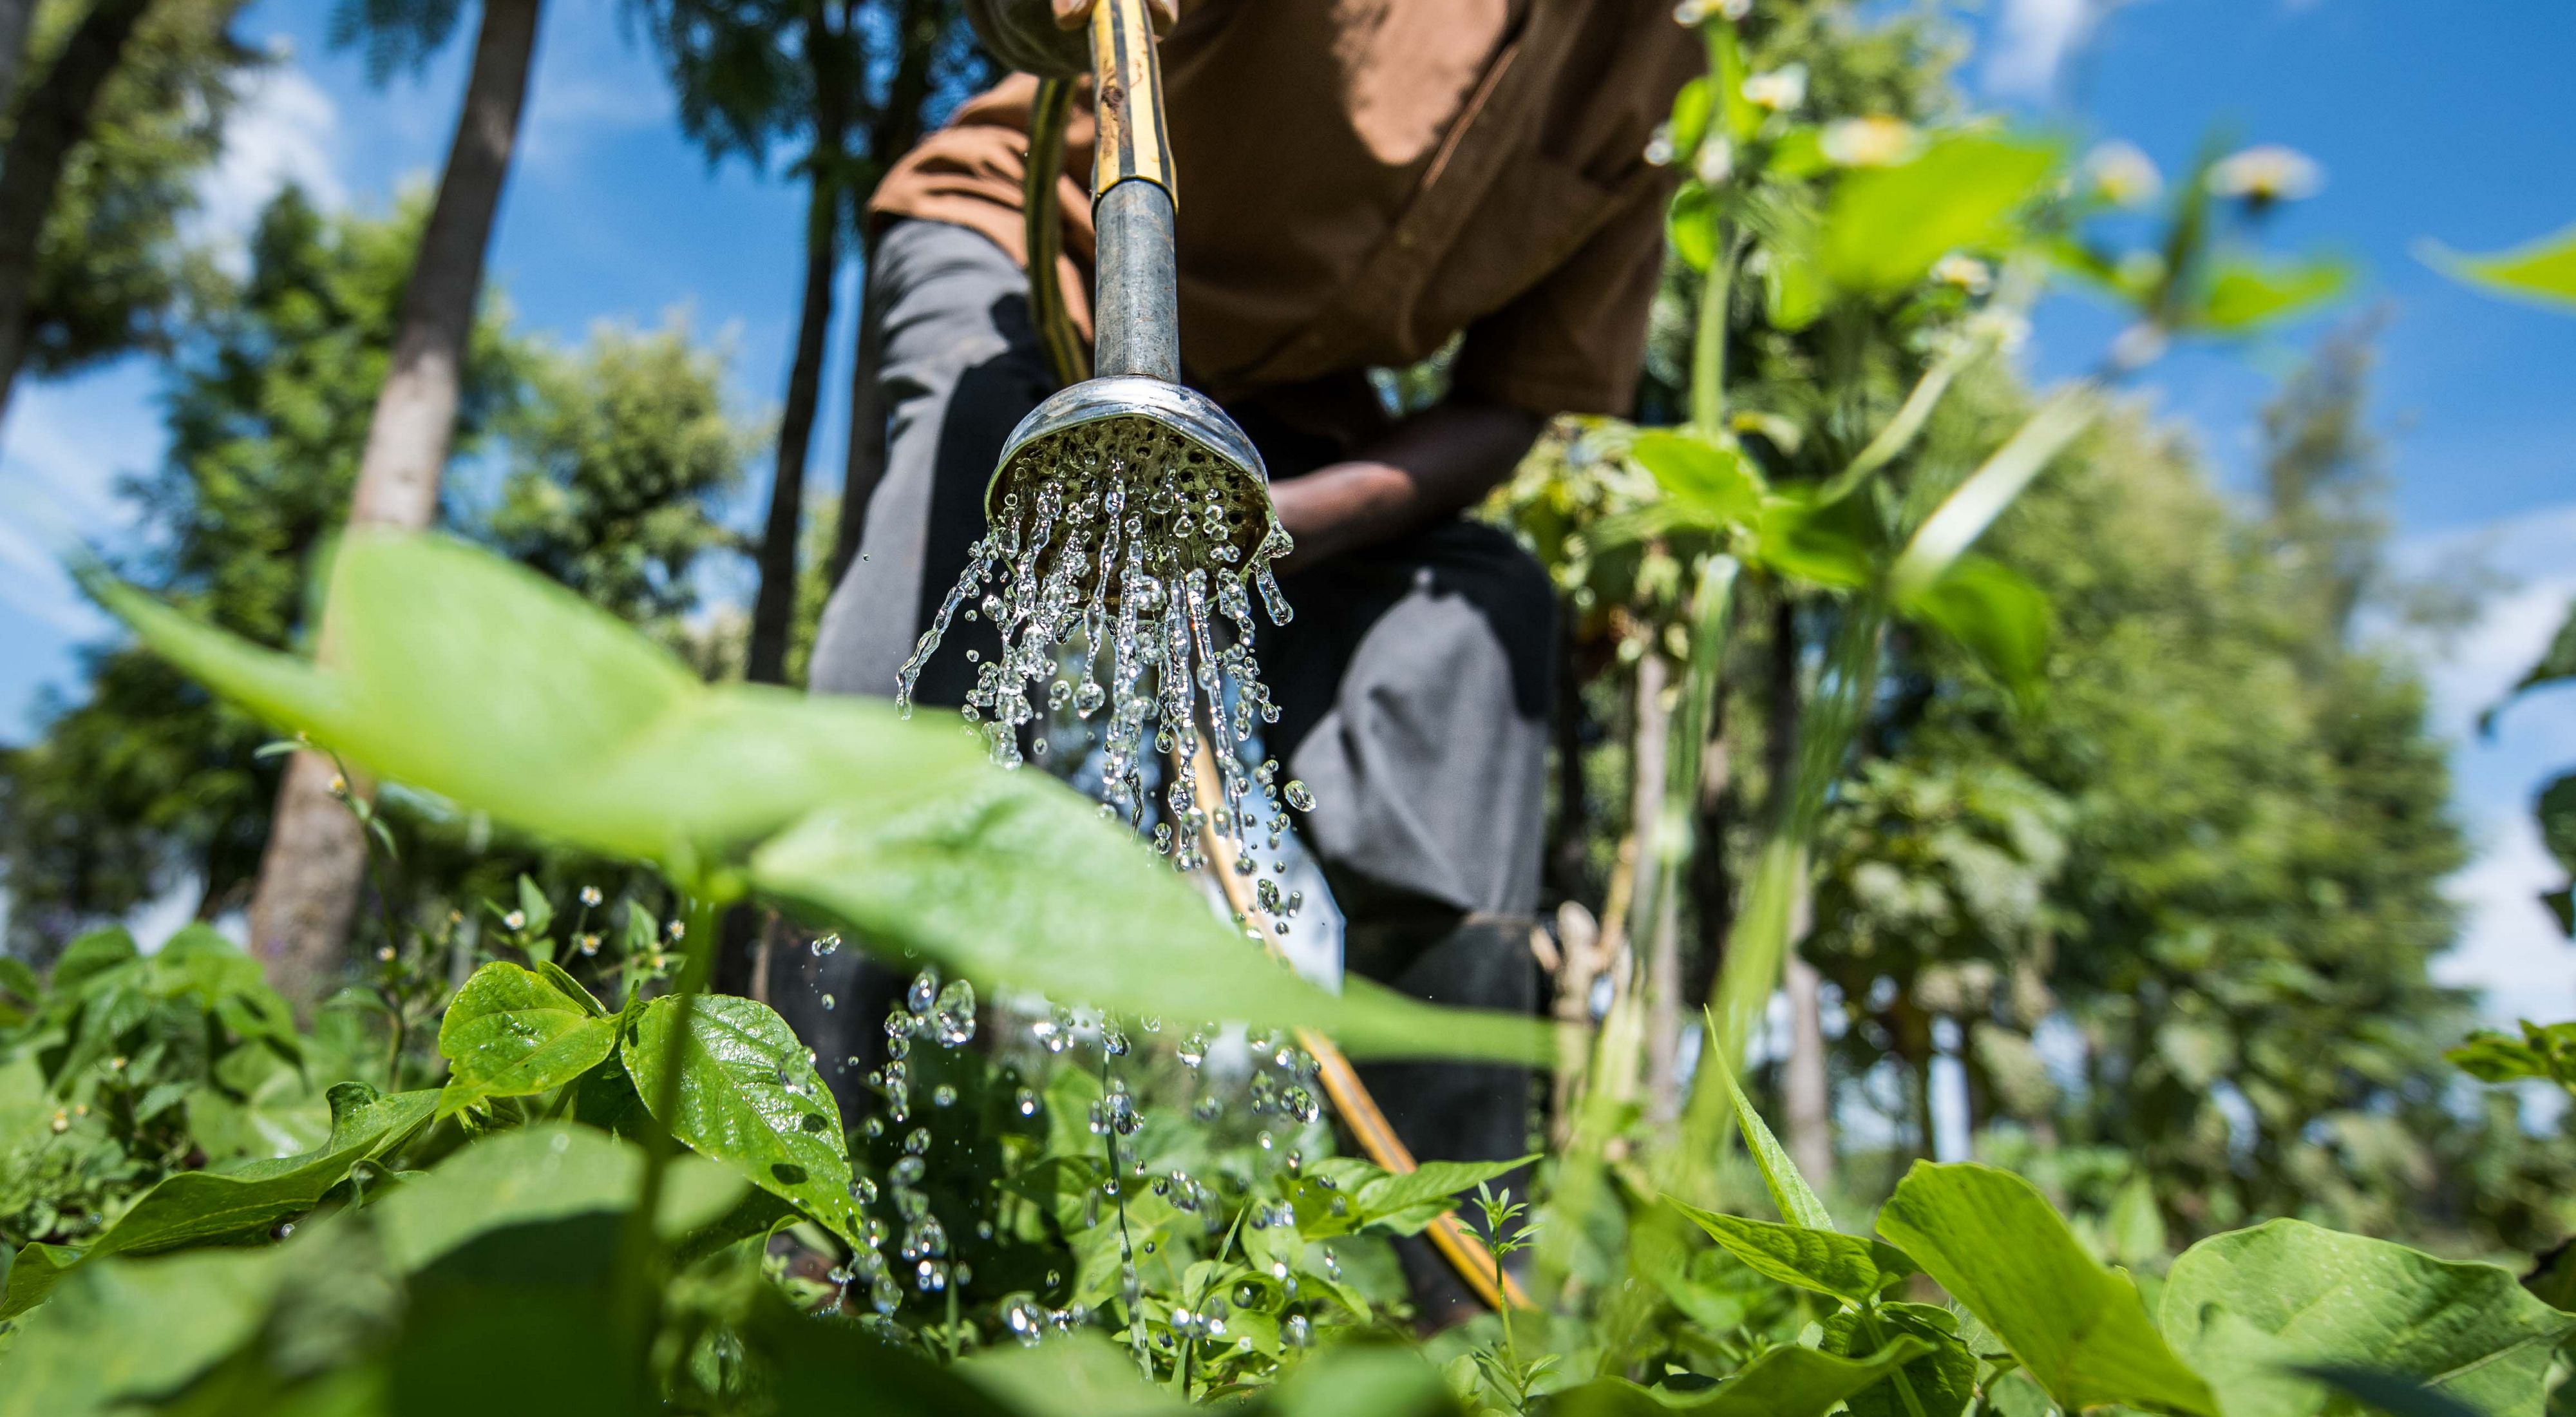 A rainwater harvesting pan provided by the Upper Tana-Nairobi Water Fund is used to irrigate food crops in the dry season.